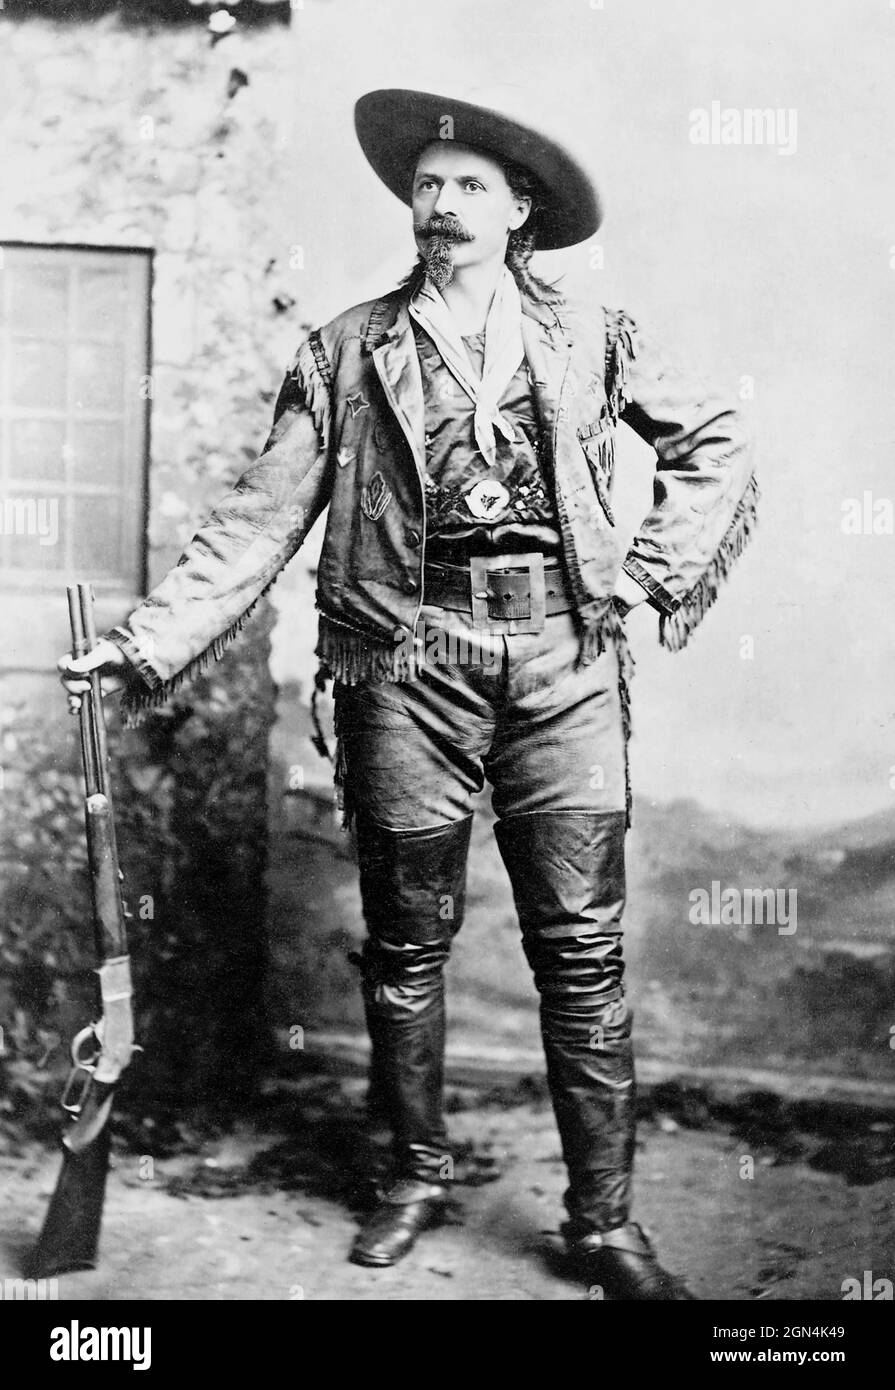 William Frederick 'Buffalo Bill' Cody (1846-1917), the bison hunter, scout and showman. Photo c.1890 Stock Photo